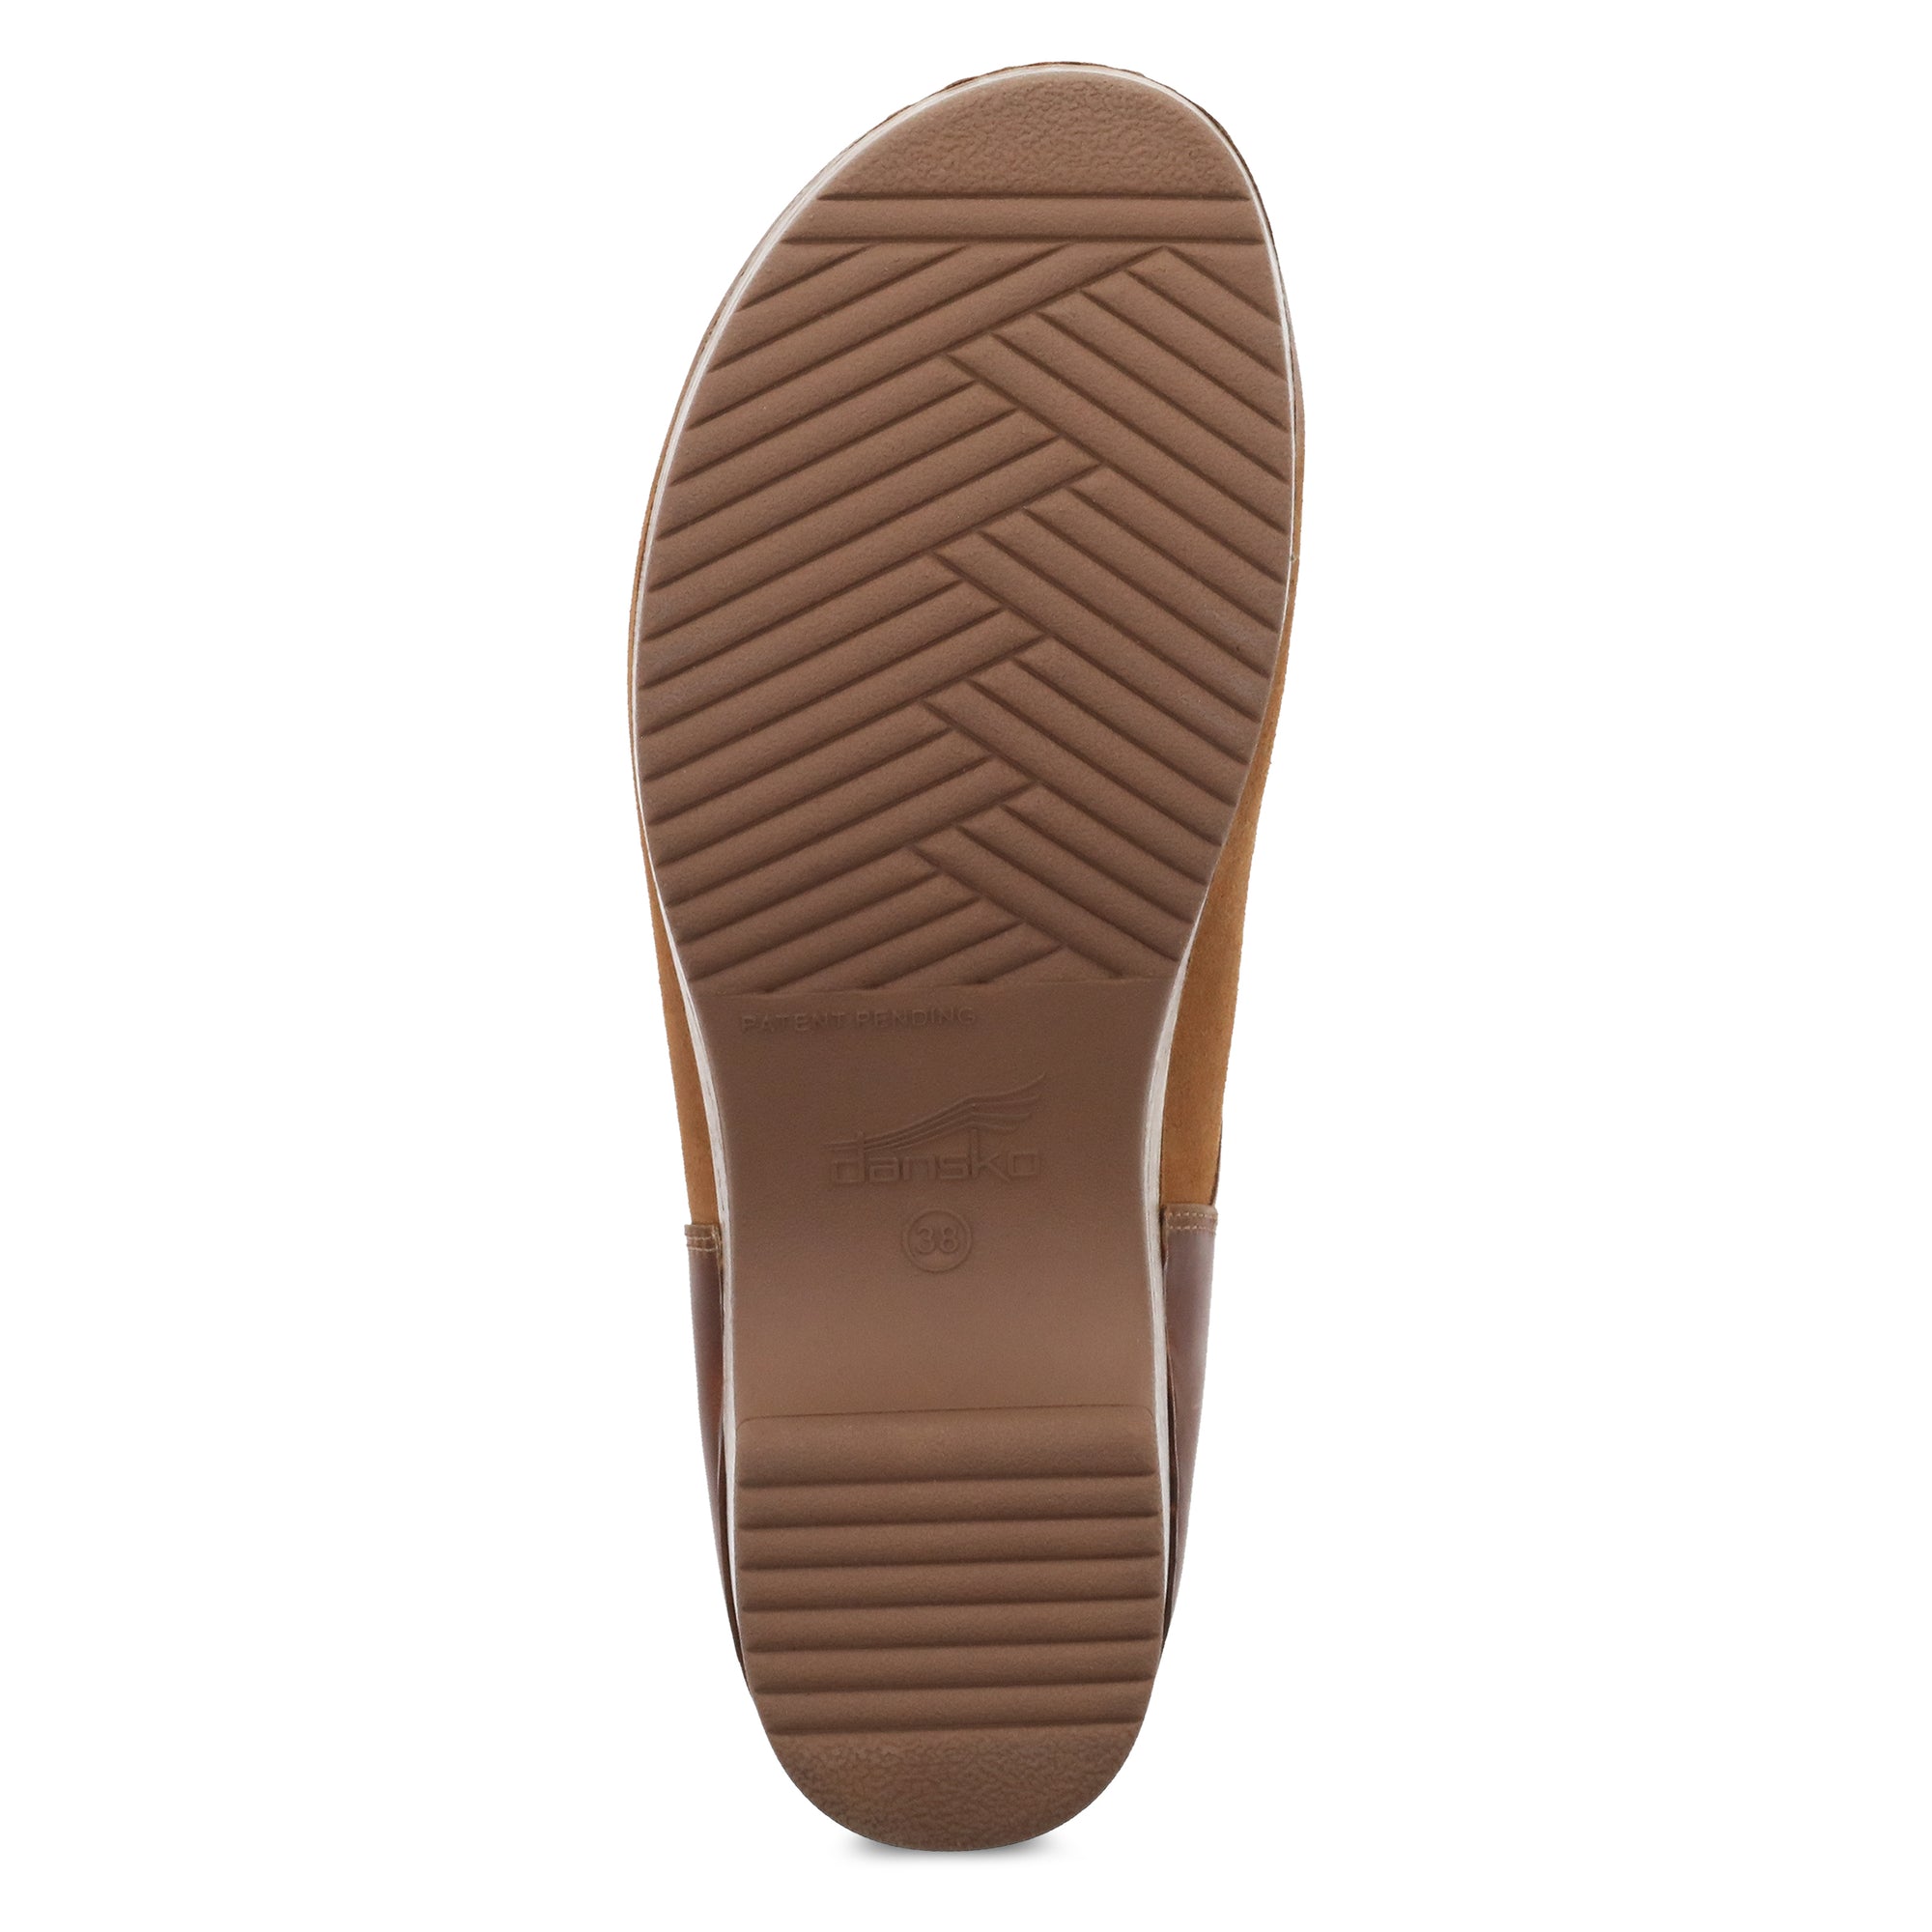 Sole image of Brenna Tan Burnished Suede